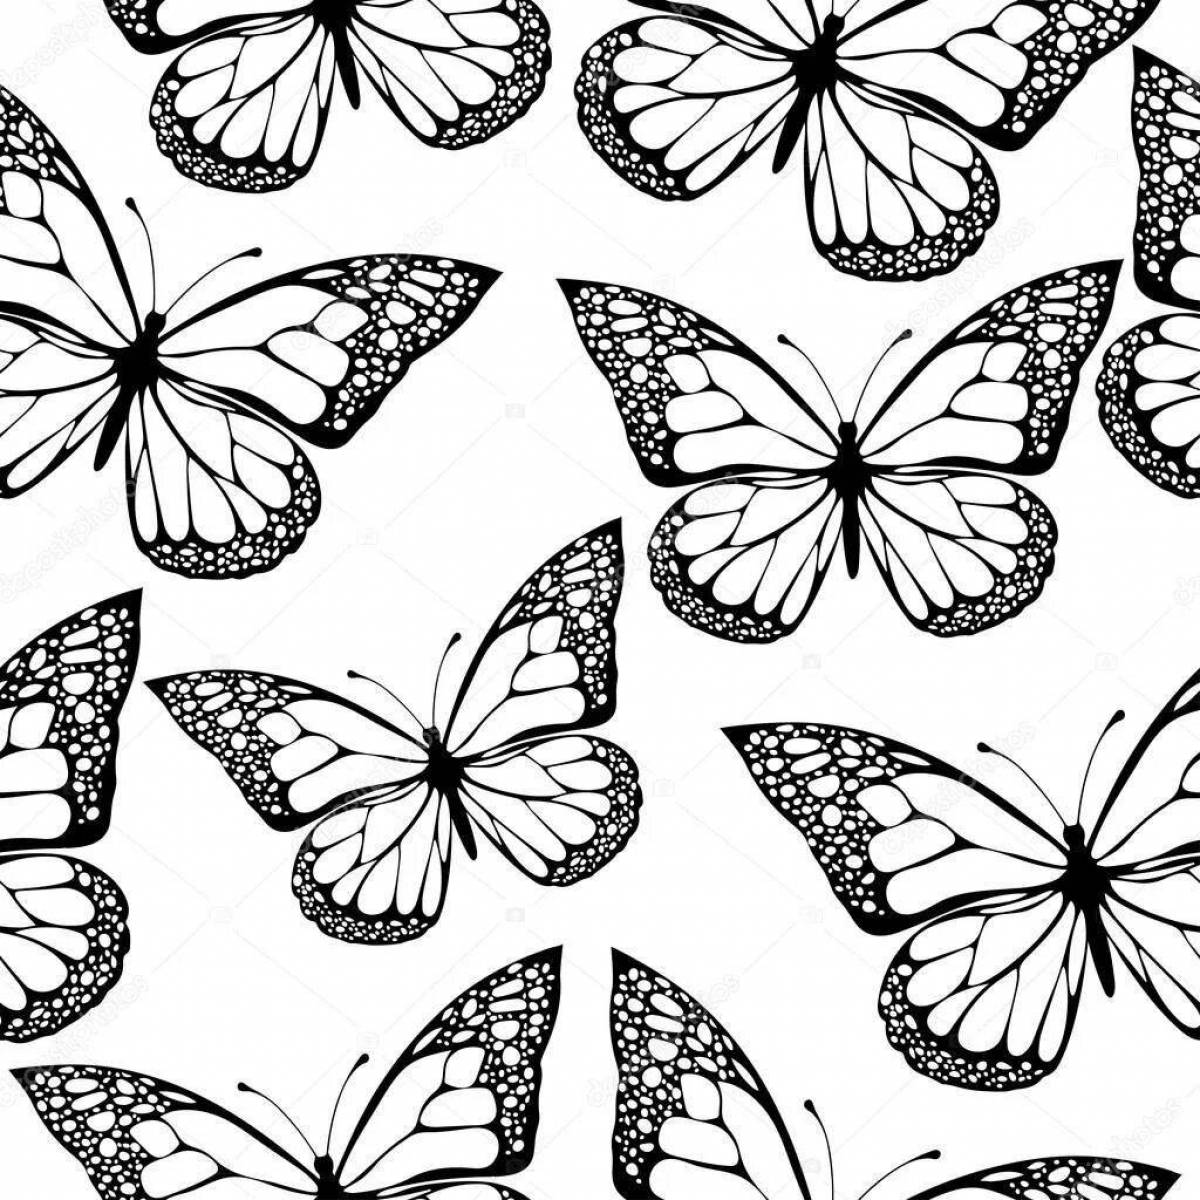 Sparkling multitude of butterflies on one sheet